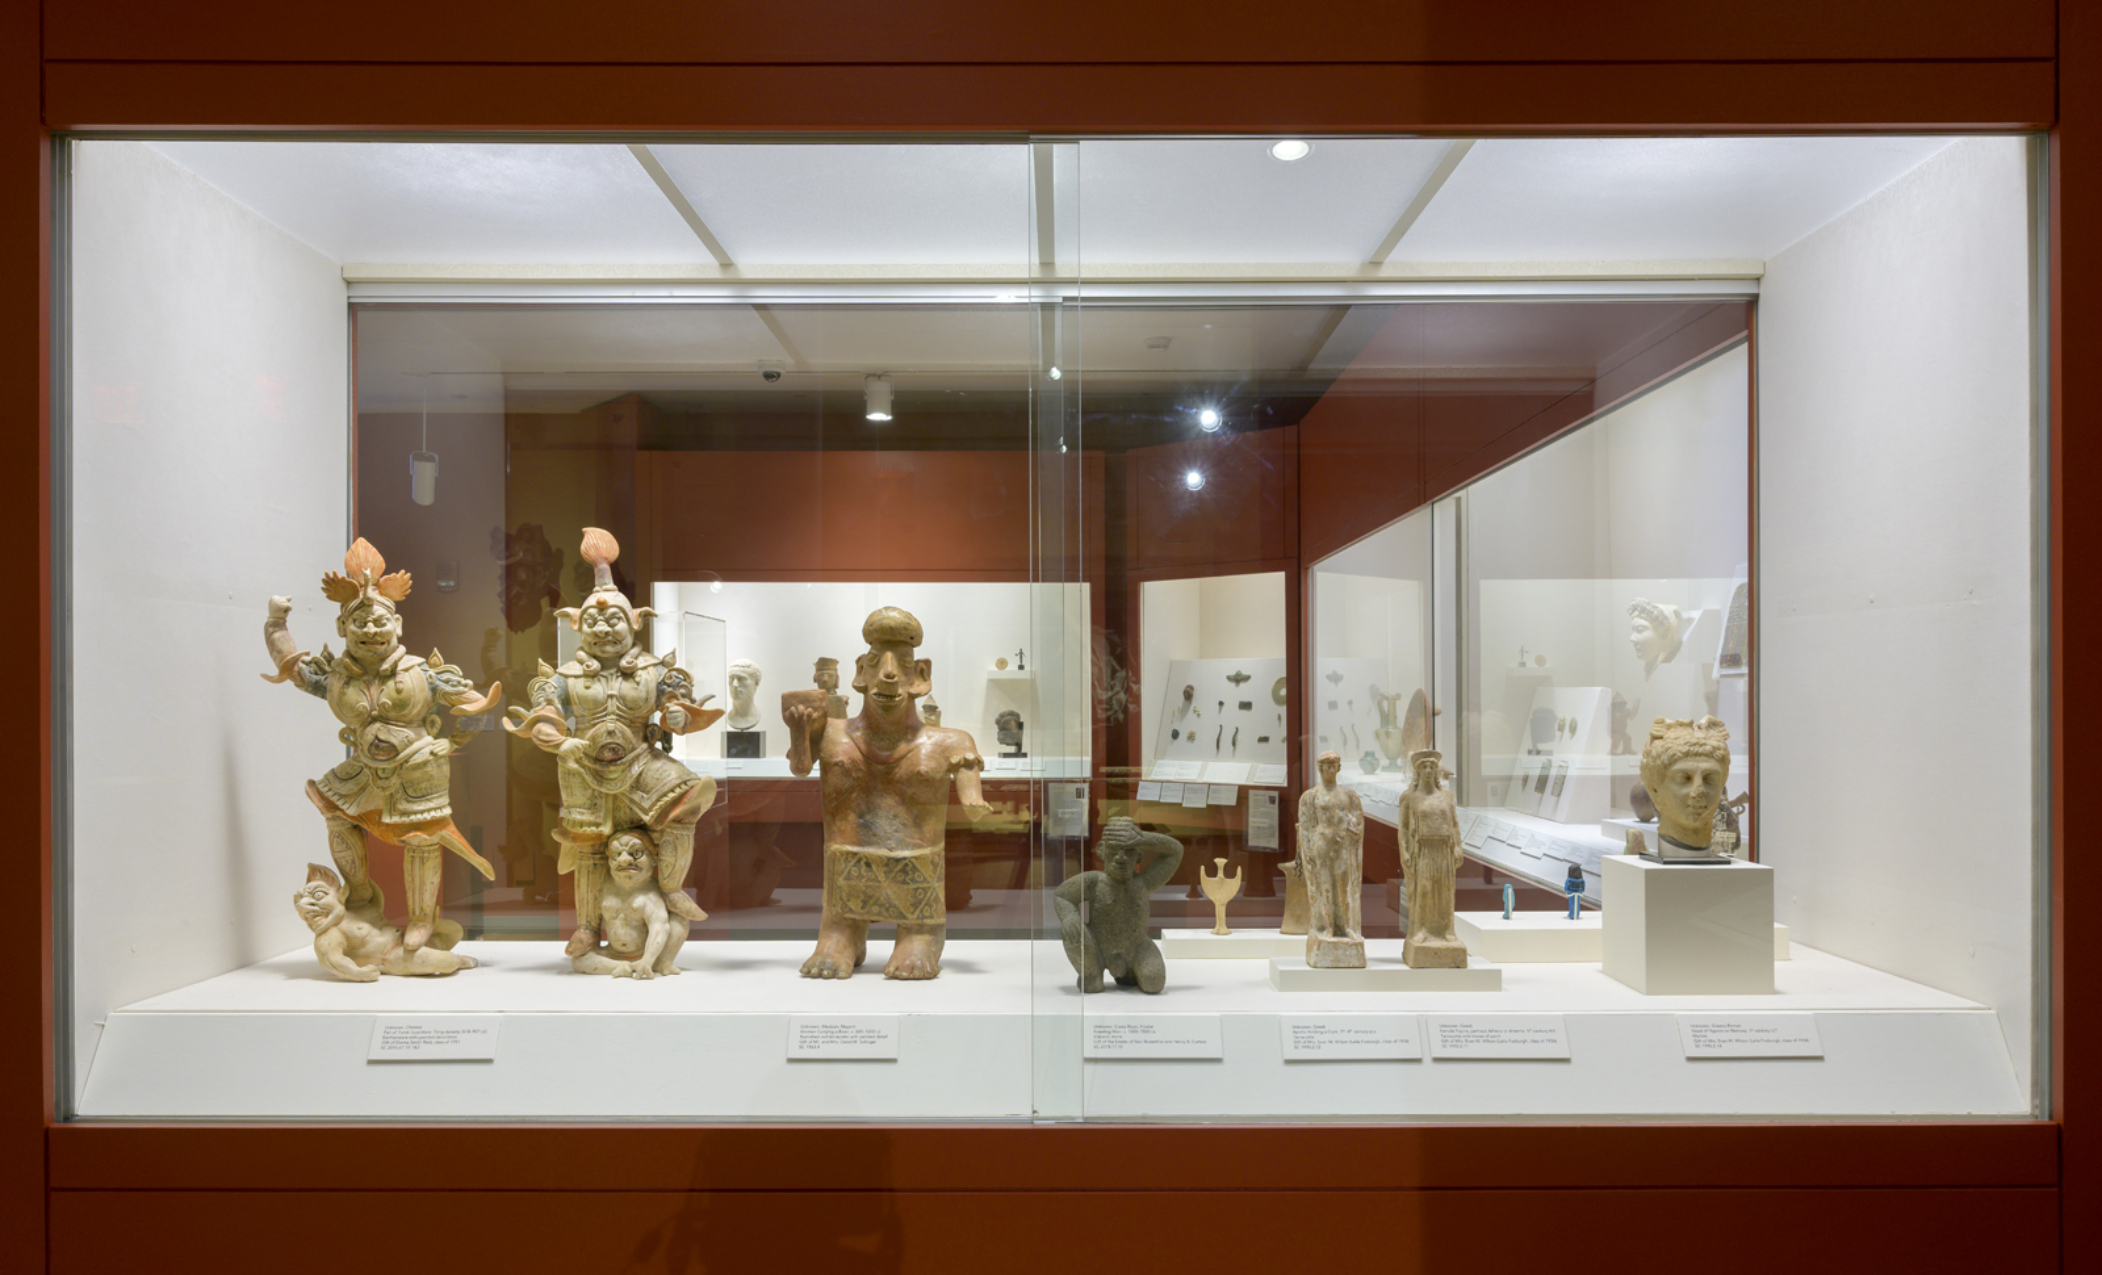 Collection of figurative stone objects in a display case